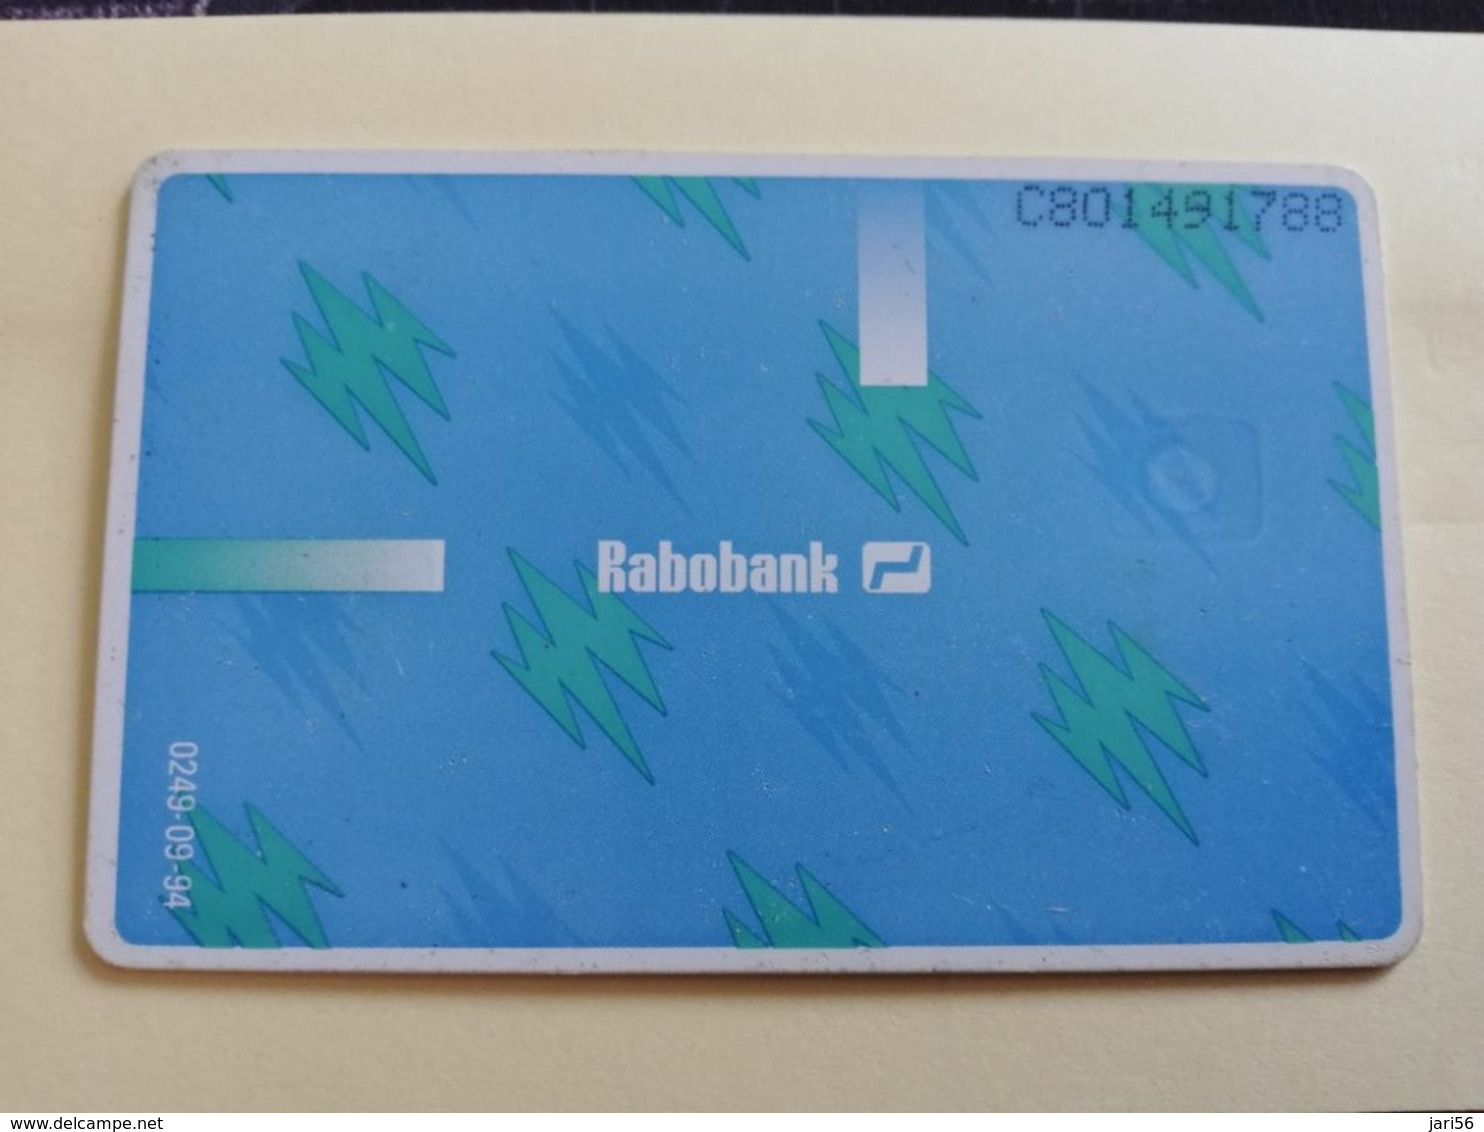 NETHERLANDS  ADVERTISING CHIPCARD HFL 2,50 CRD 016   RABOBANK     Fine Used   ** 3164** - Privadas